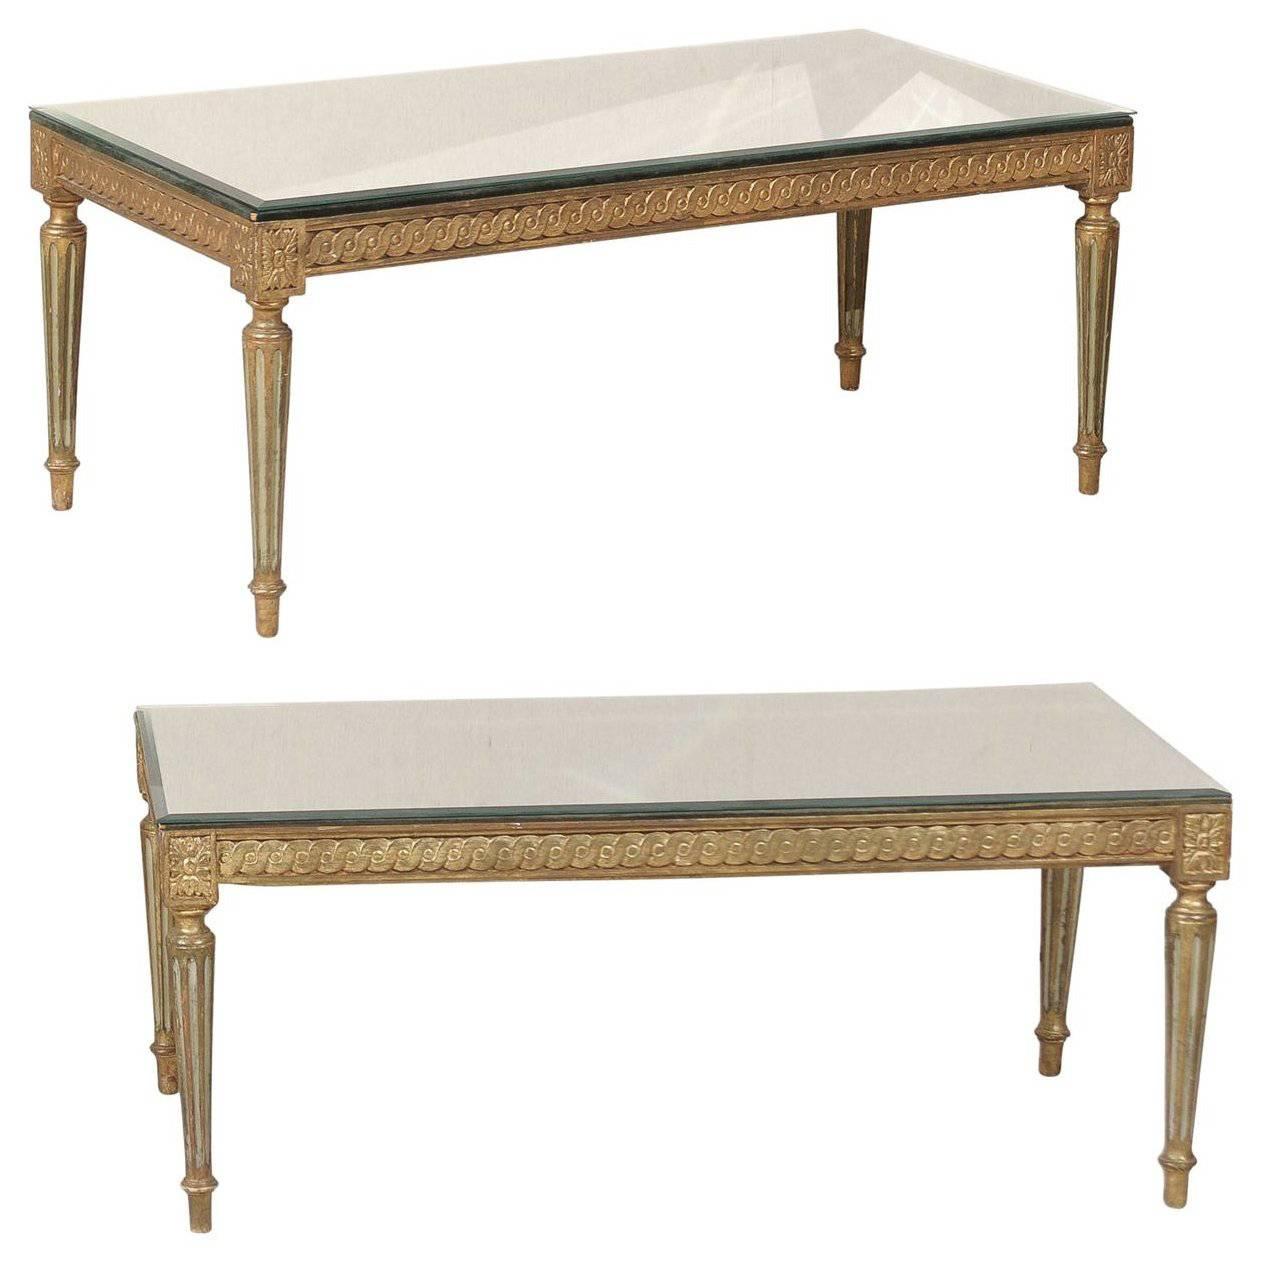 French Louis XVI Style Gilded and Painted Coffee Table with Mirrored Top